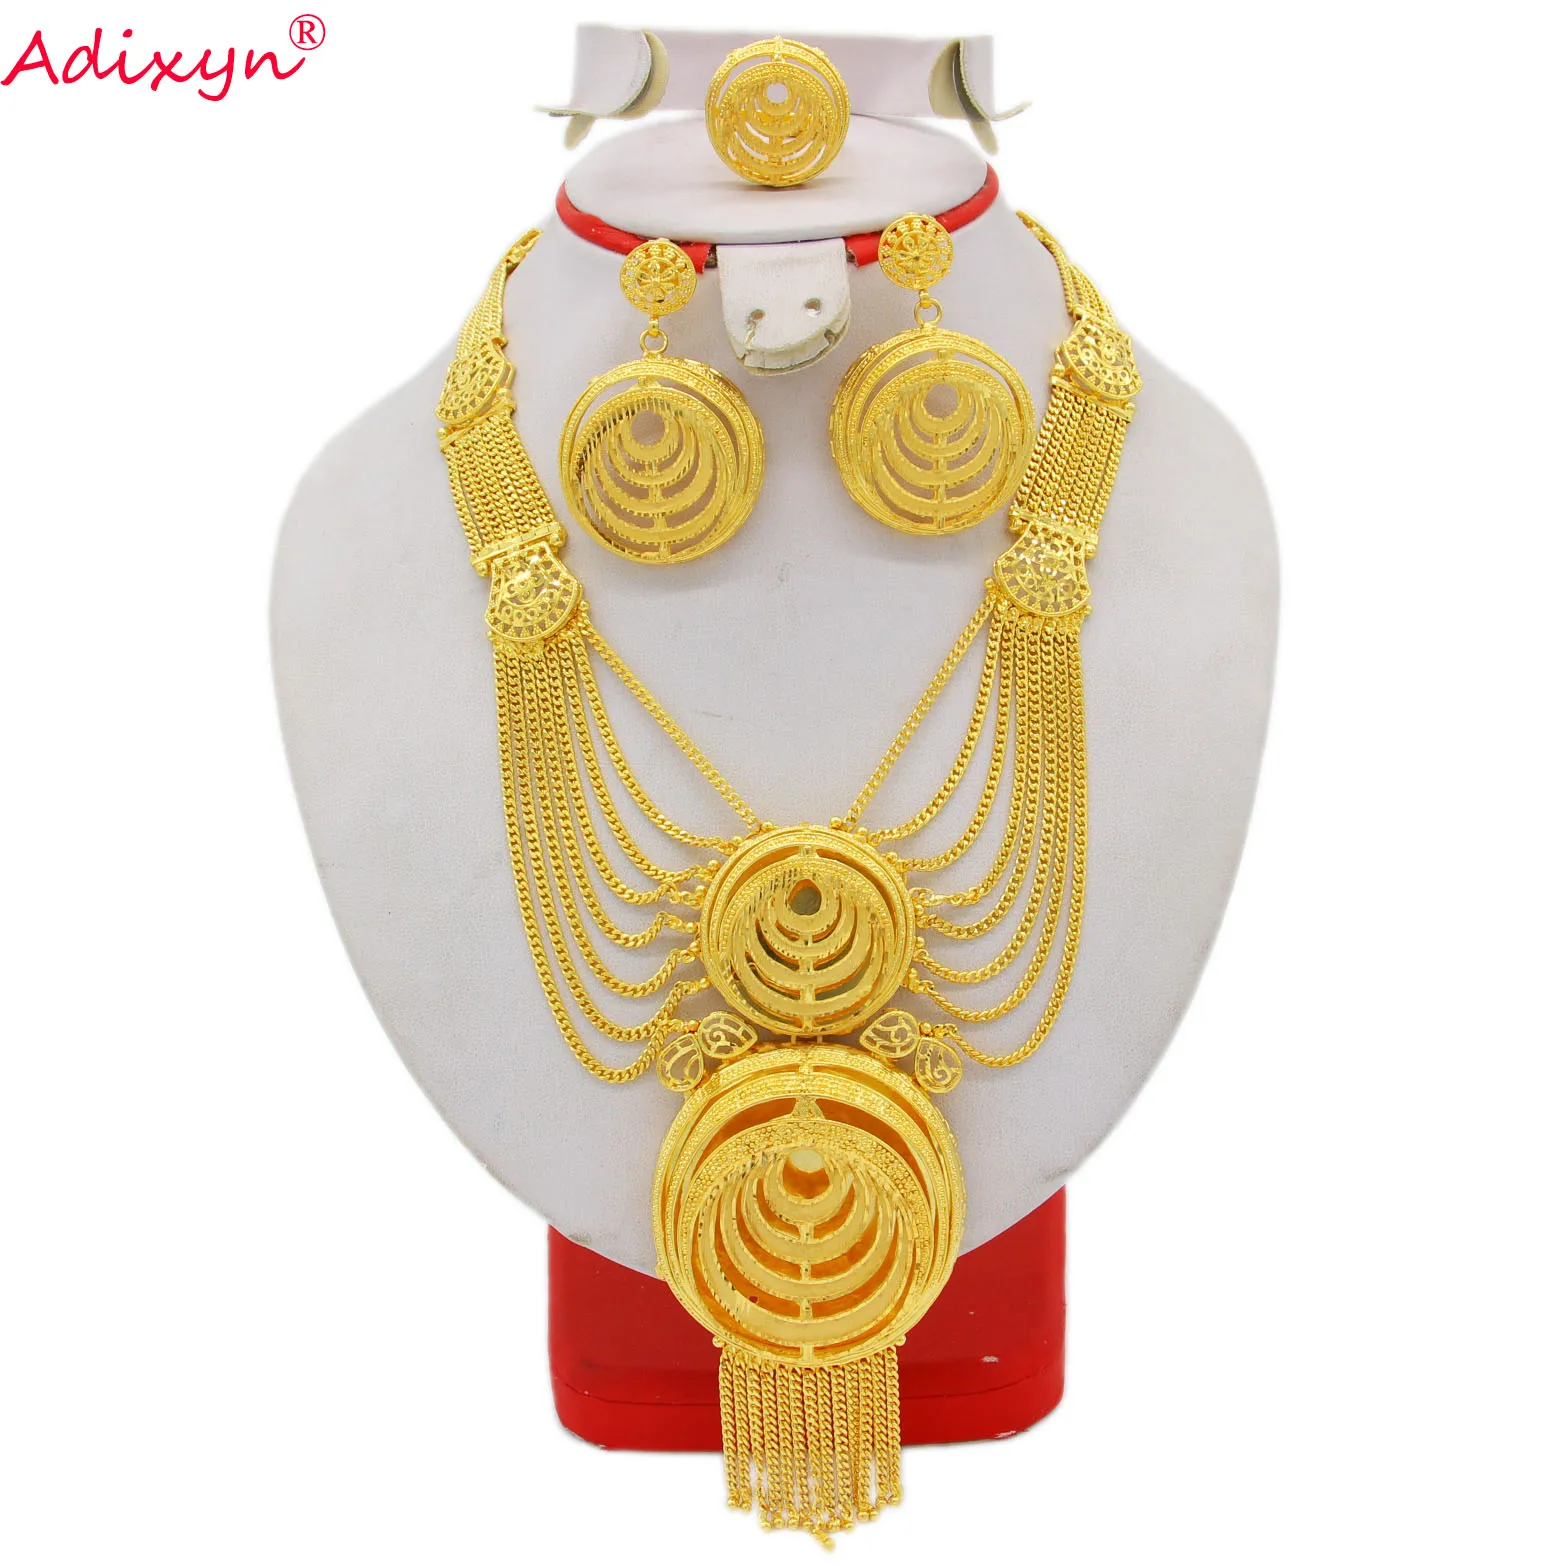 

Adixyn Dubai 24K Gold Color Jewellry Set for Women India African Bridal Wedding Gifts Tassles Necklace/Earrings/Ring Set N122717